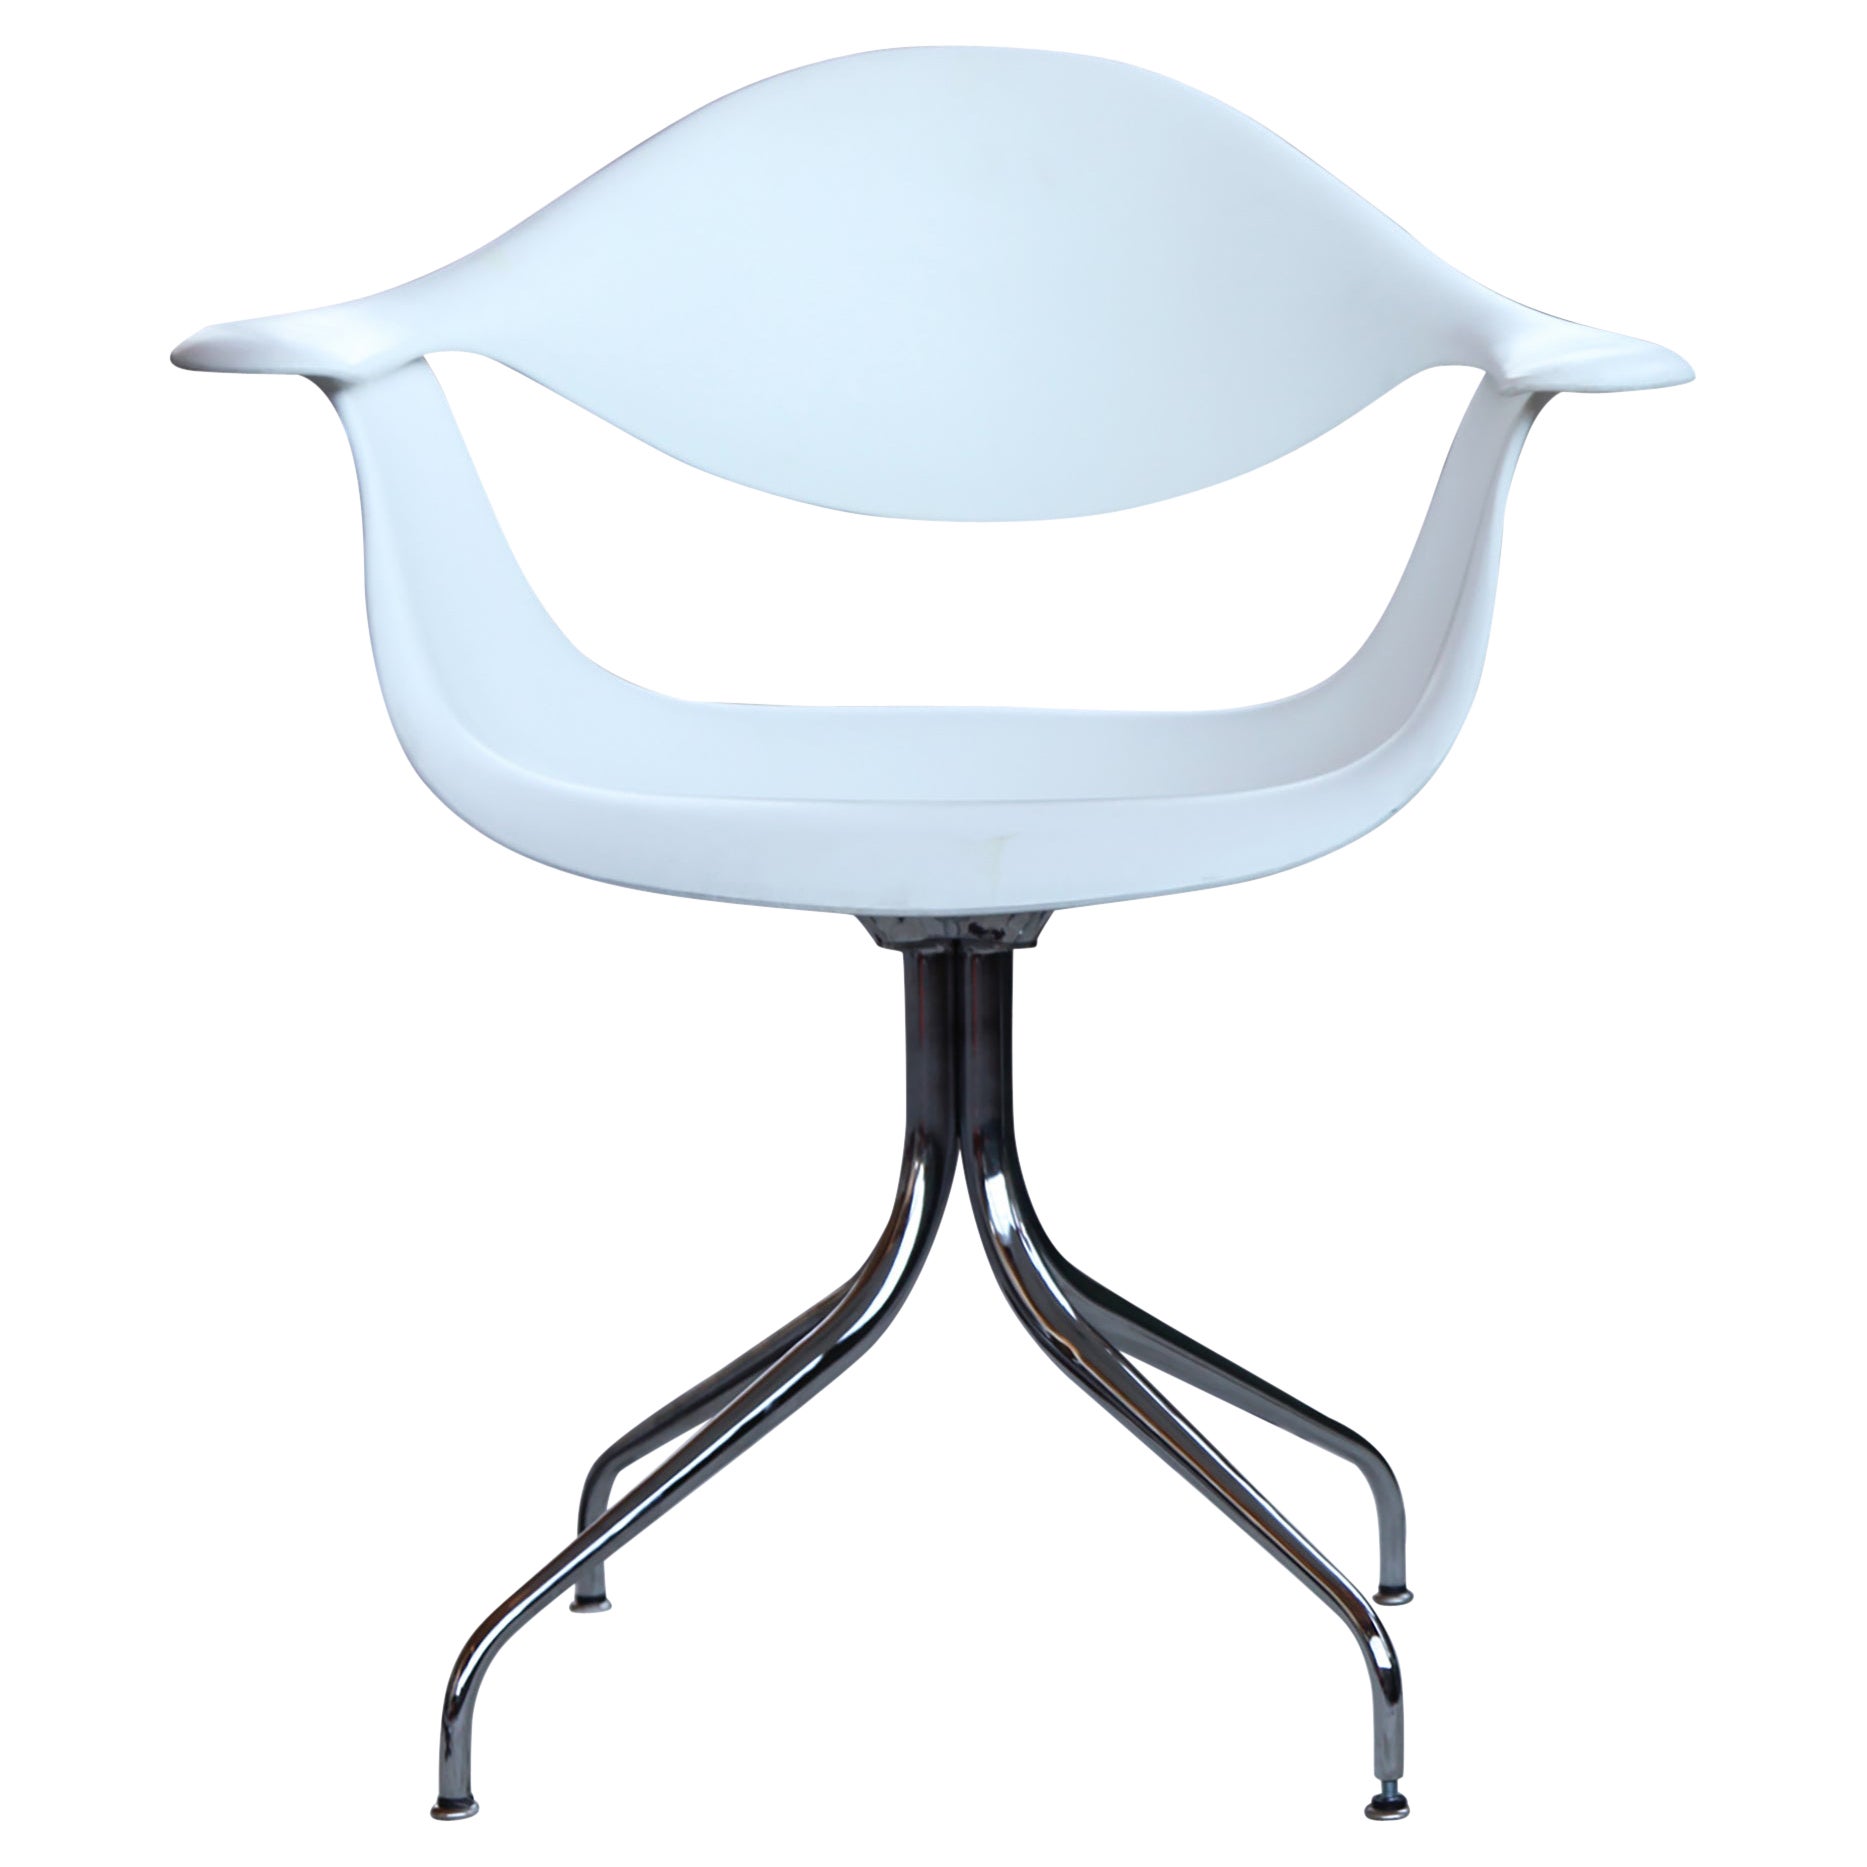 George Nelson for Herman Miller White Swag Chair, One Chair